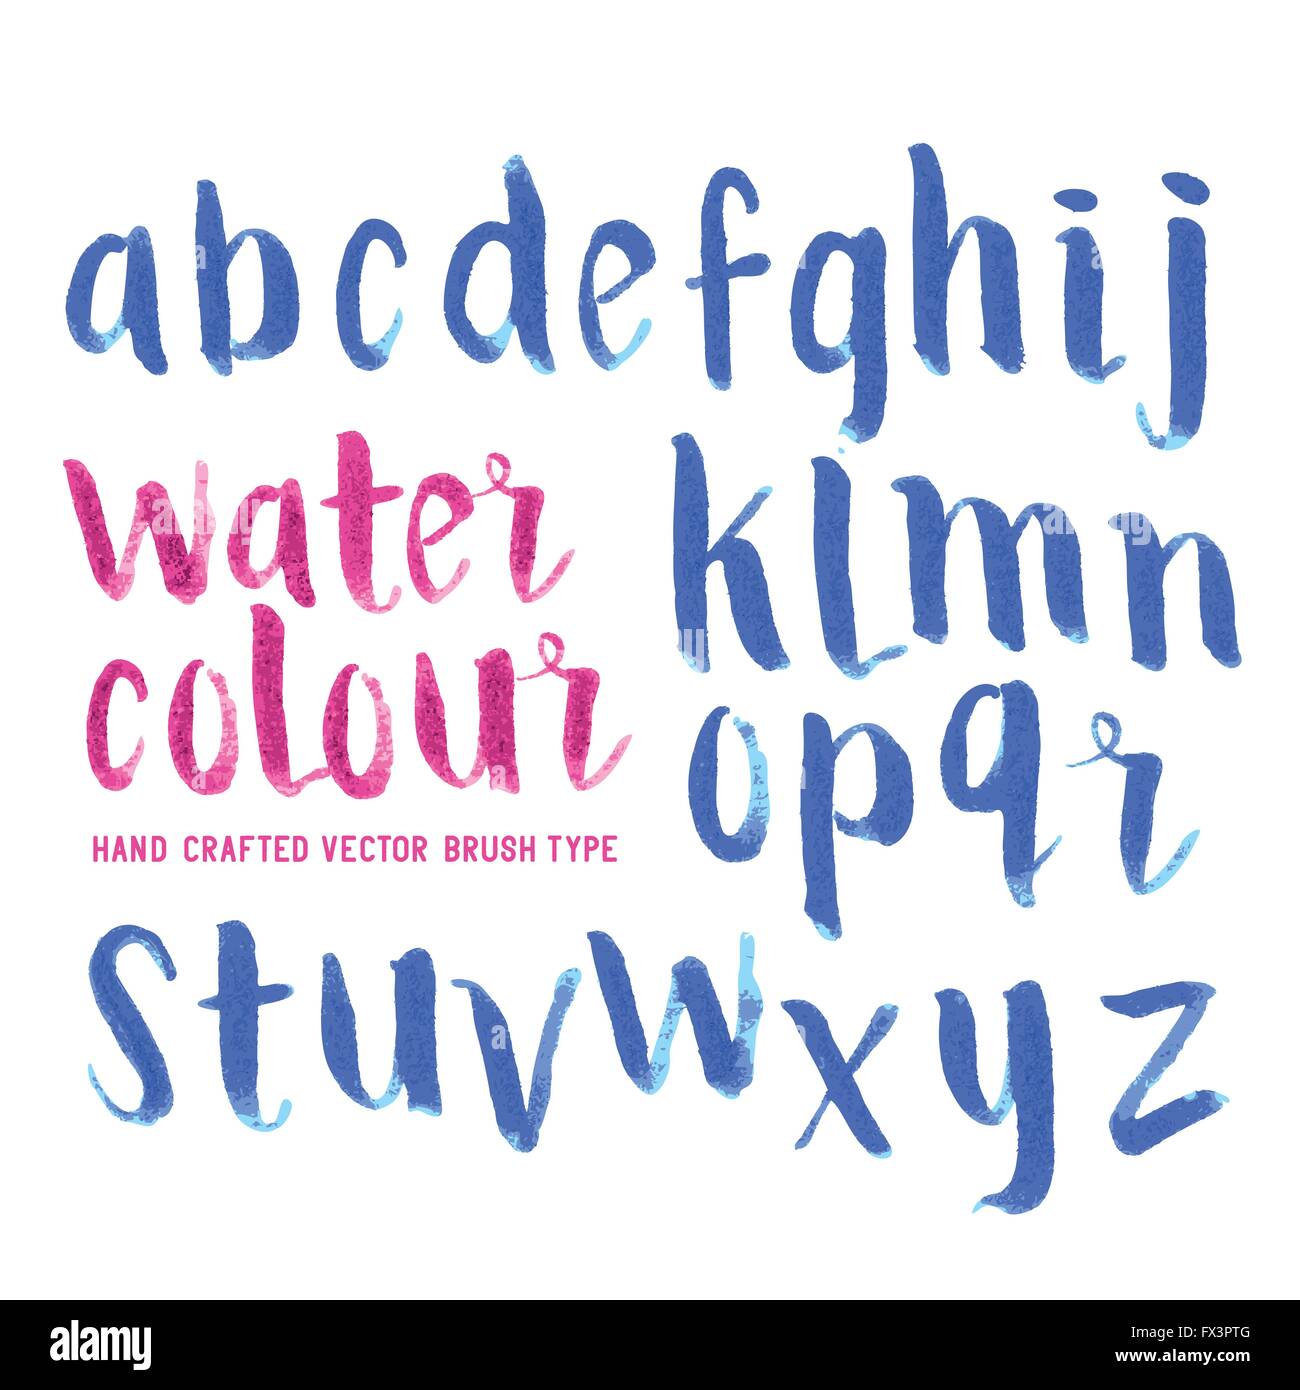 Watercolour Brush Letters. Hand made Alphabet lettering in brushed watercolour. Vector illustration. Stock Vector